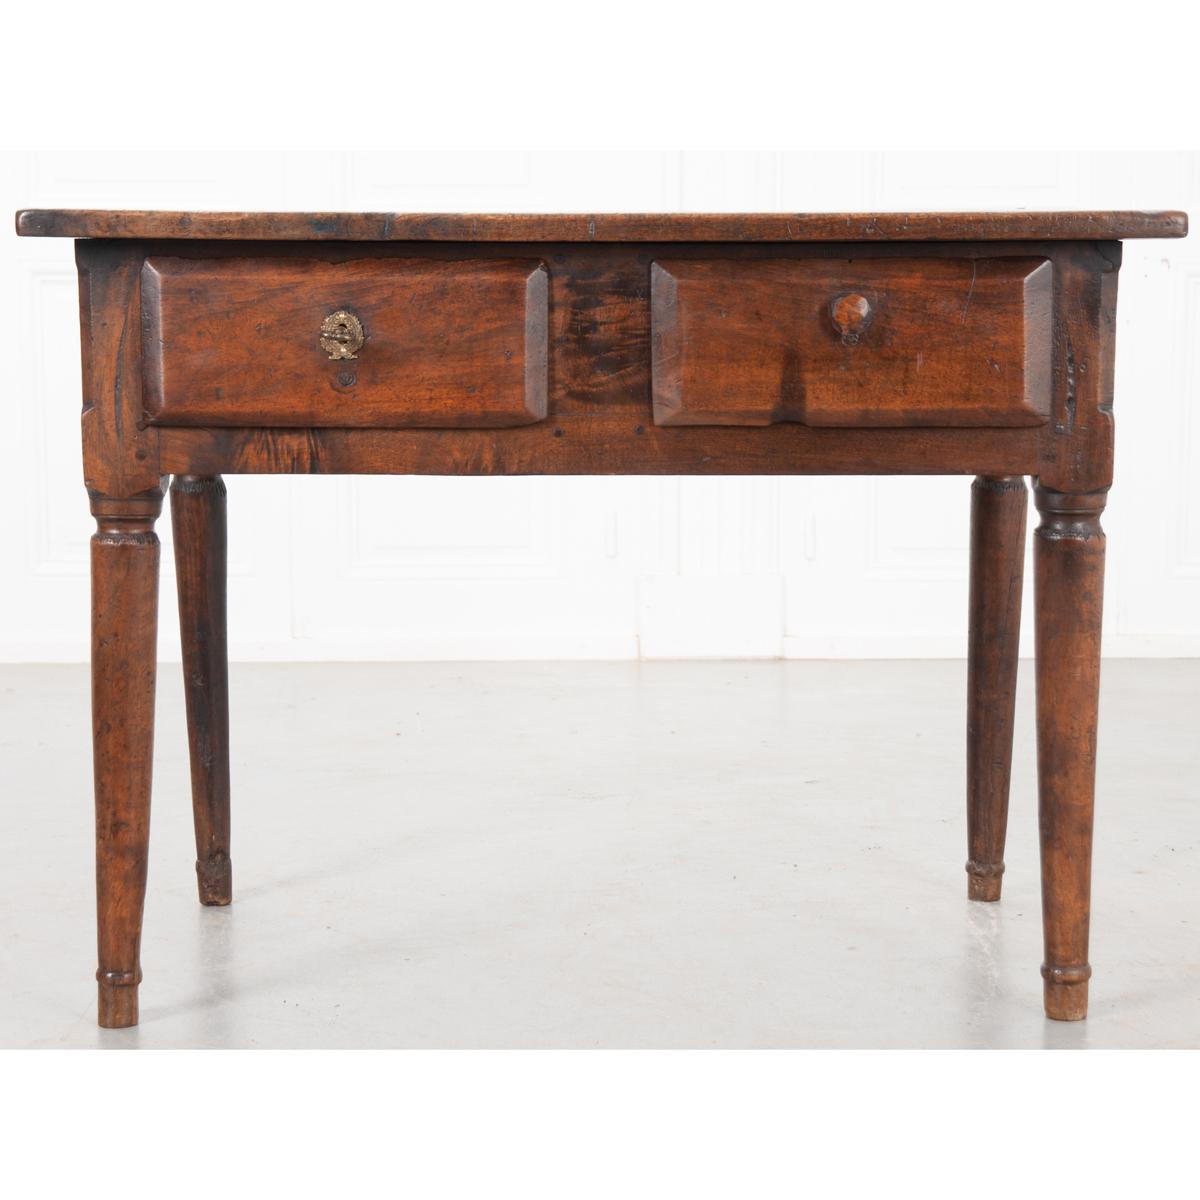 This is a French 18th century solid oak table. It is circa 1780. The top is well used and has a wonderful patina. It has two large drawers, one with a wood pull and one with a lock, key, and escutcheon. The escutcheon plate and lock are not the